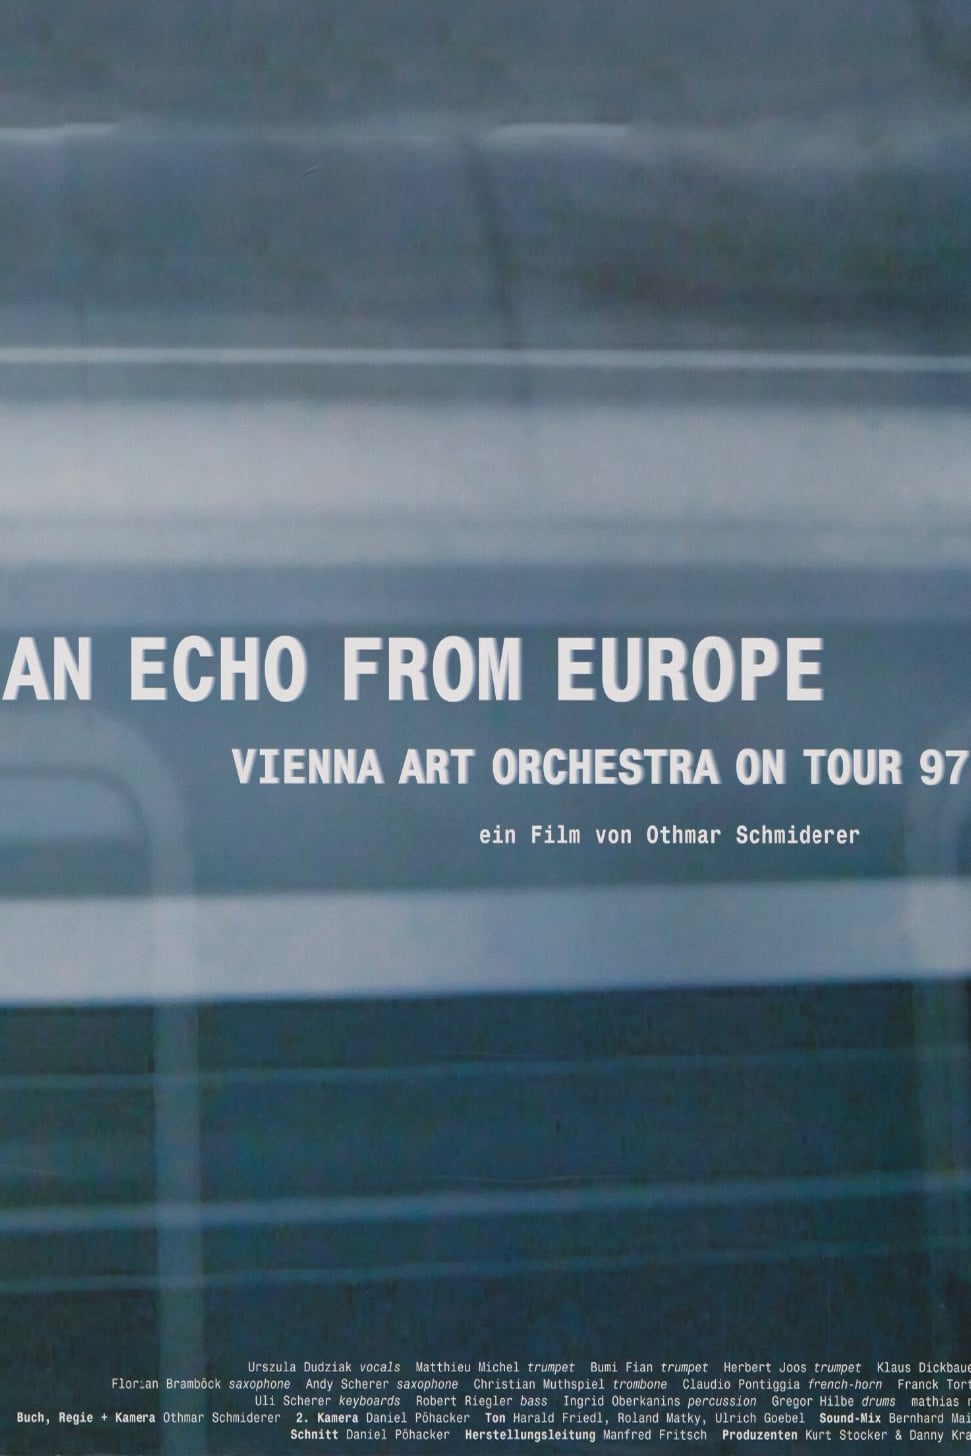 An Echo from Europe - Vienna Art Orchestra on Tour